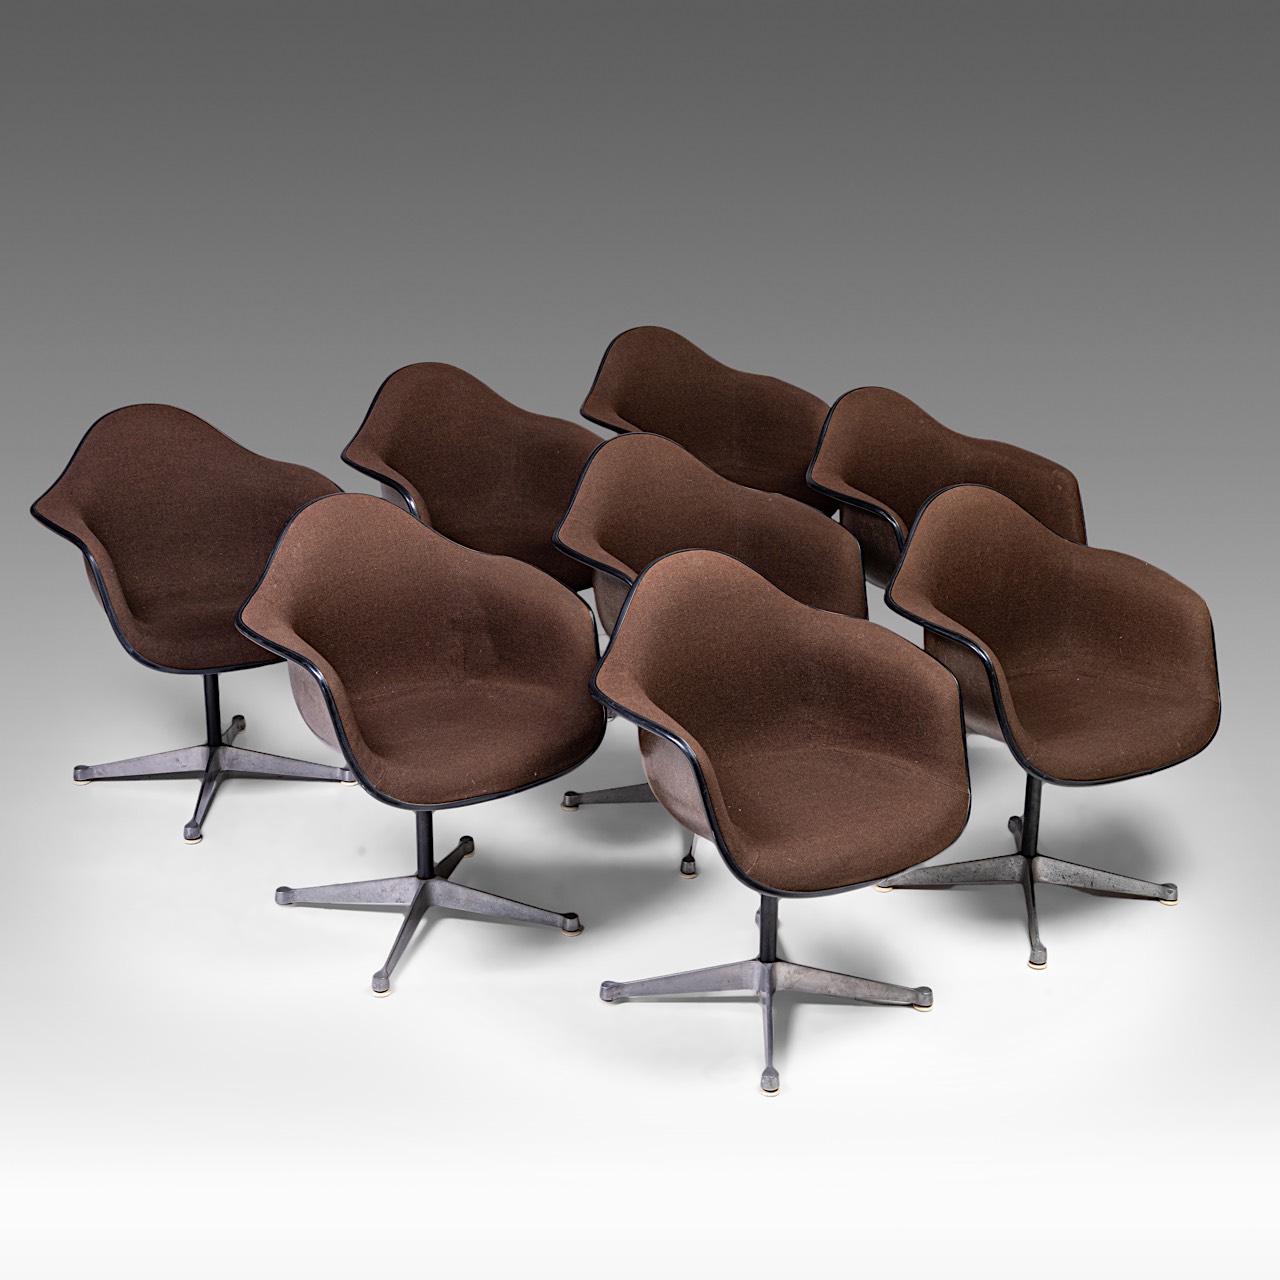 A set of 8 Charles & Ray Eames fibreglass shell chairs for Herman Miller, H 79 cm - Image 2 of 19